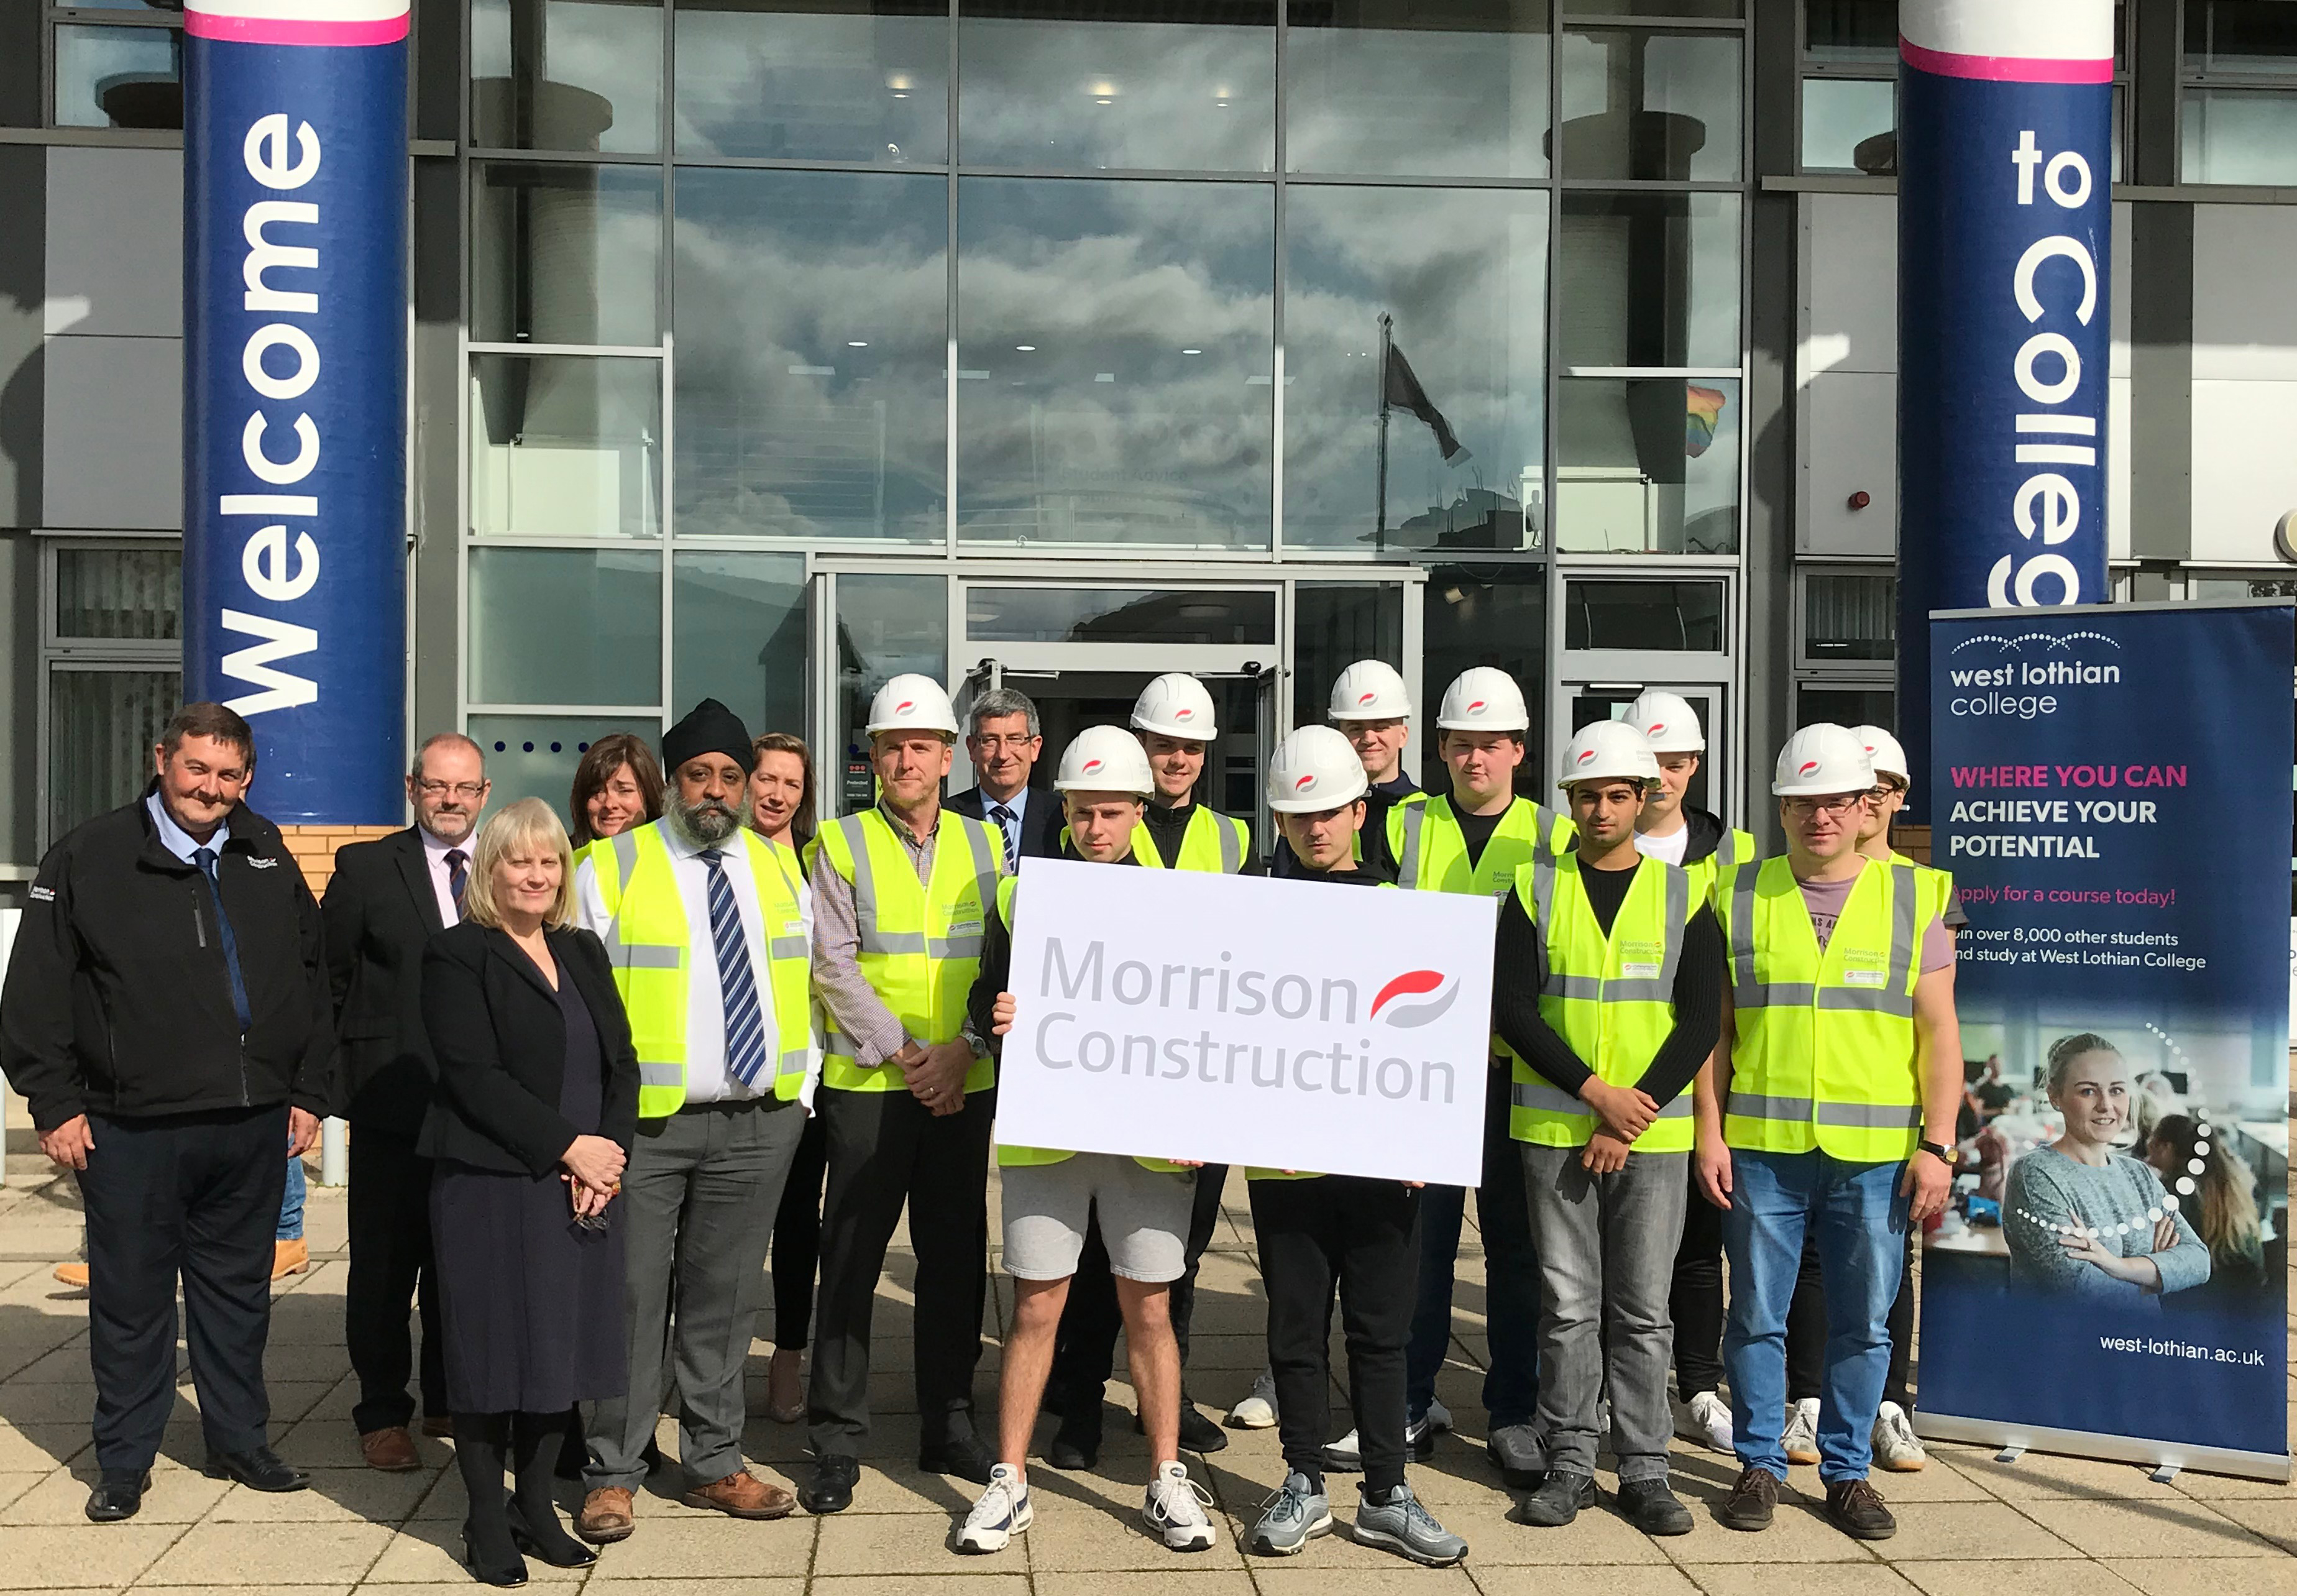 Morrison Construction develops college course as career pathway into industry